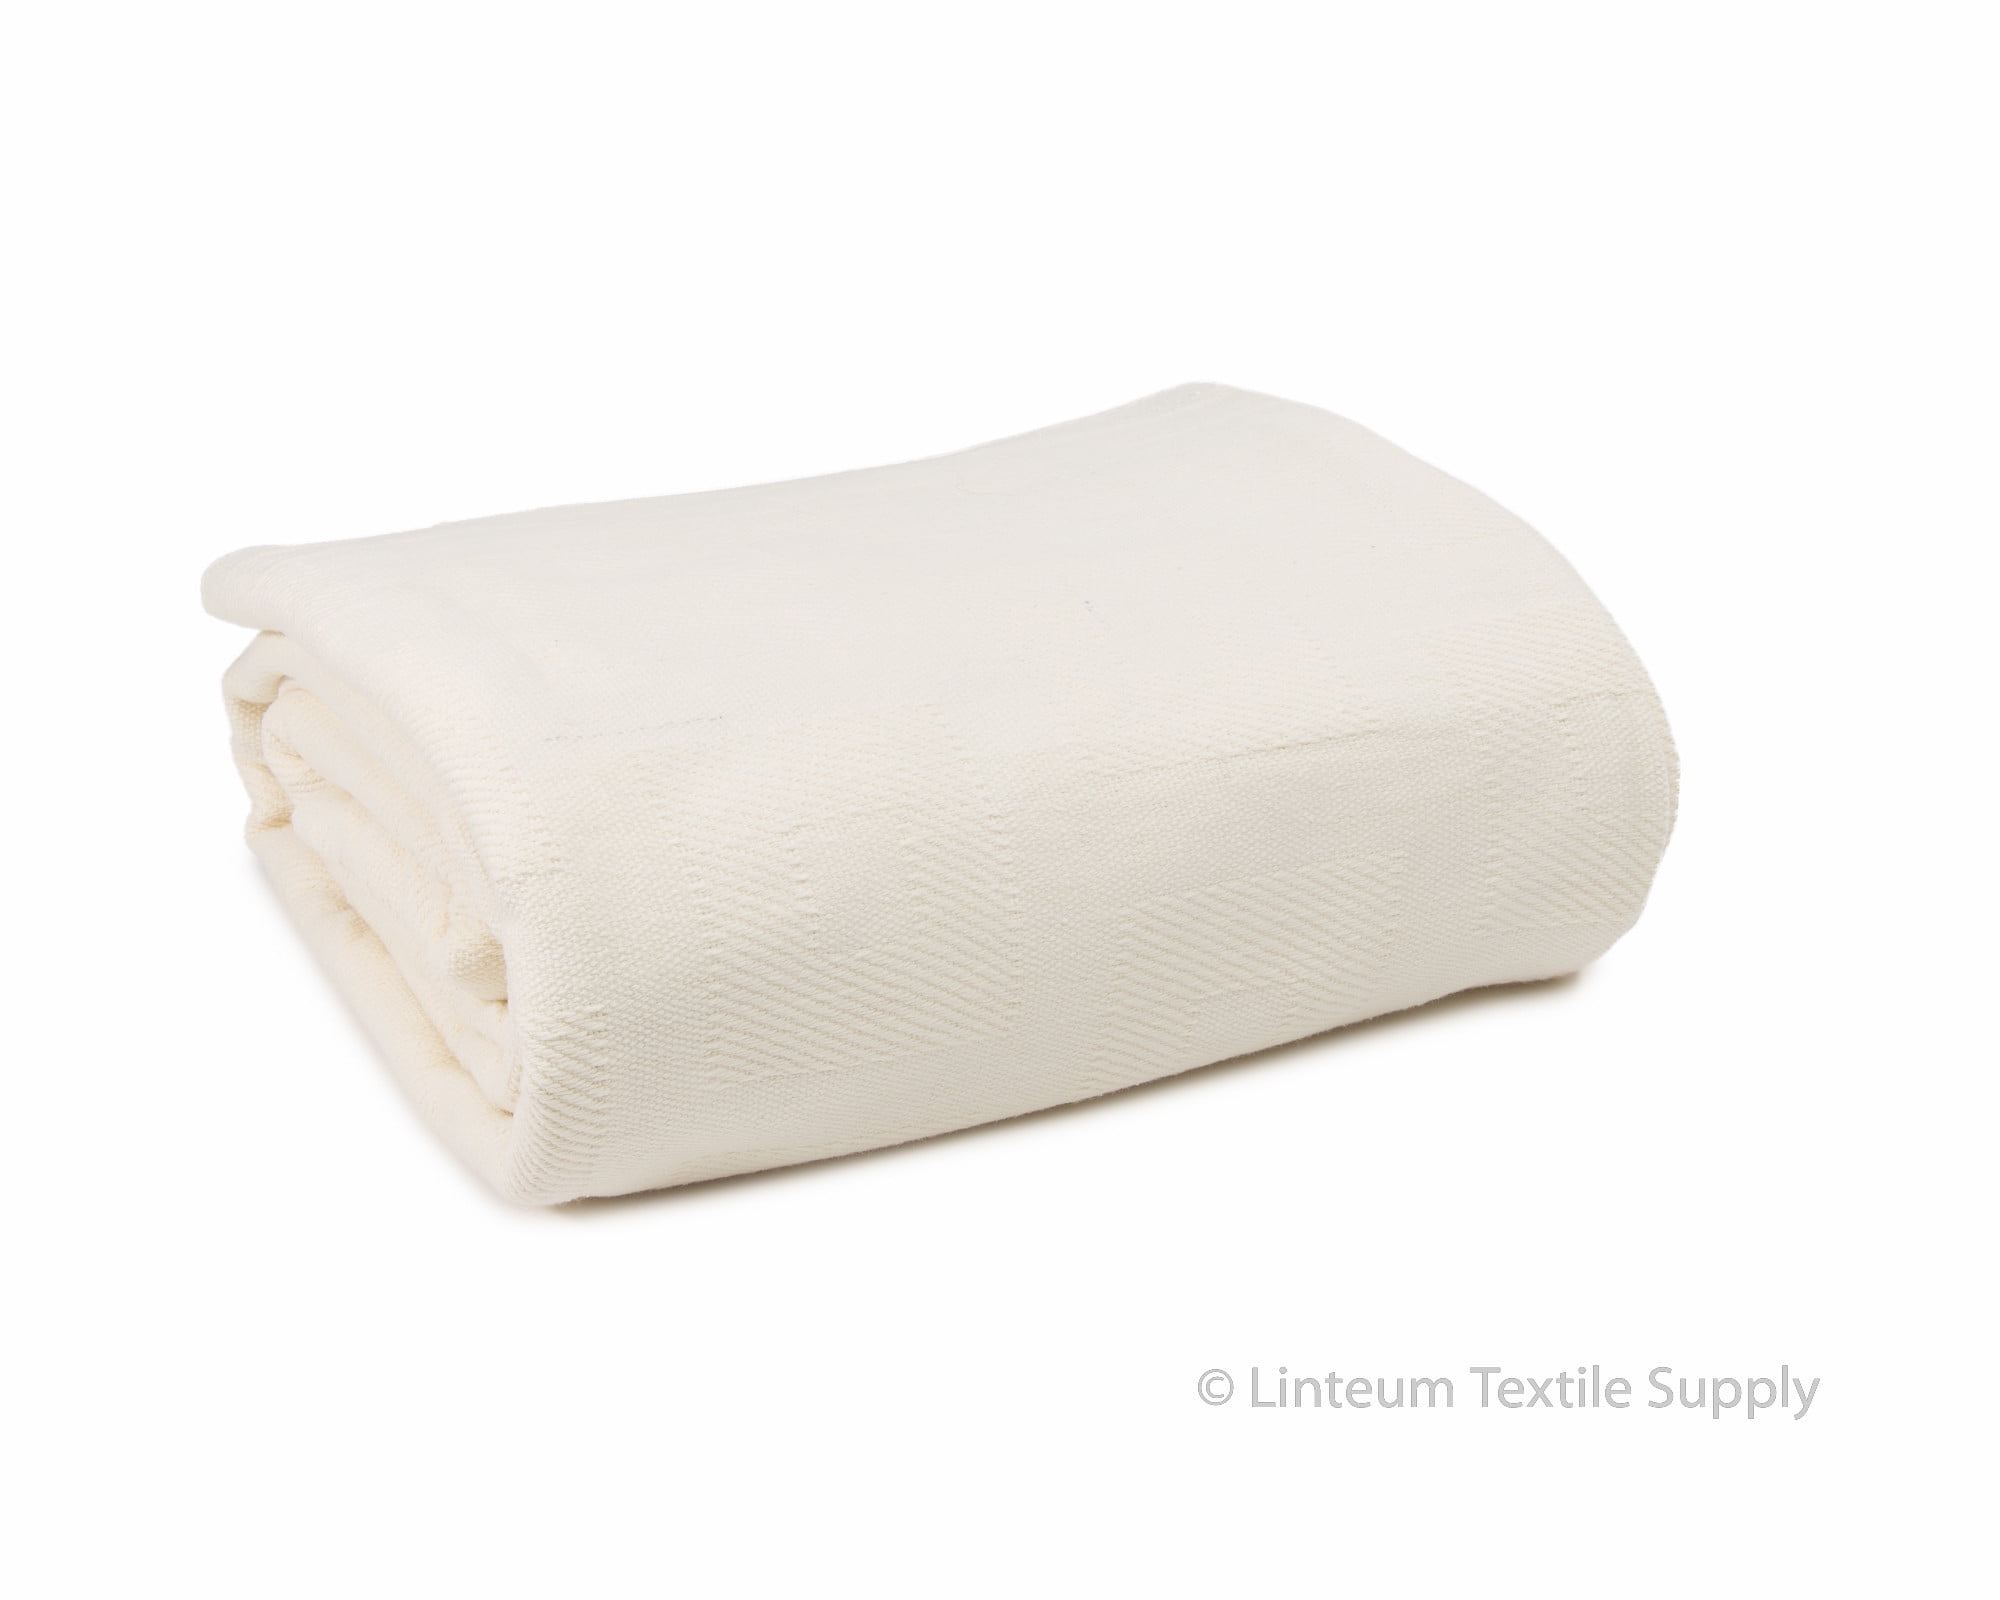 Linteum Textile Hospital Thermal in, Blanket, SNAGLESS 100% Spread White) Cotton (74x100